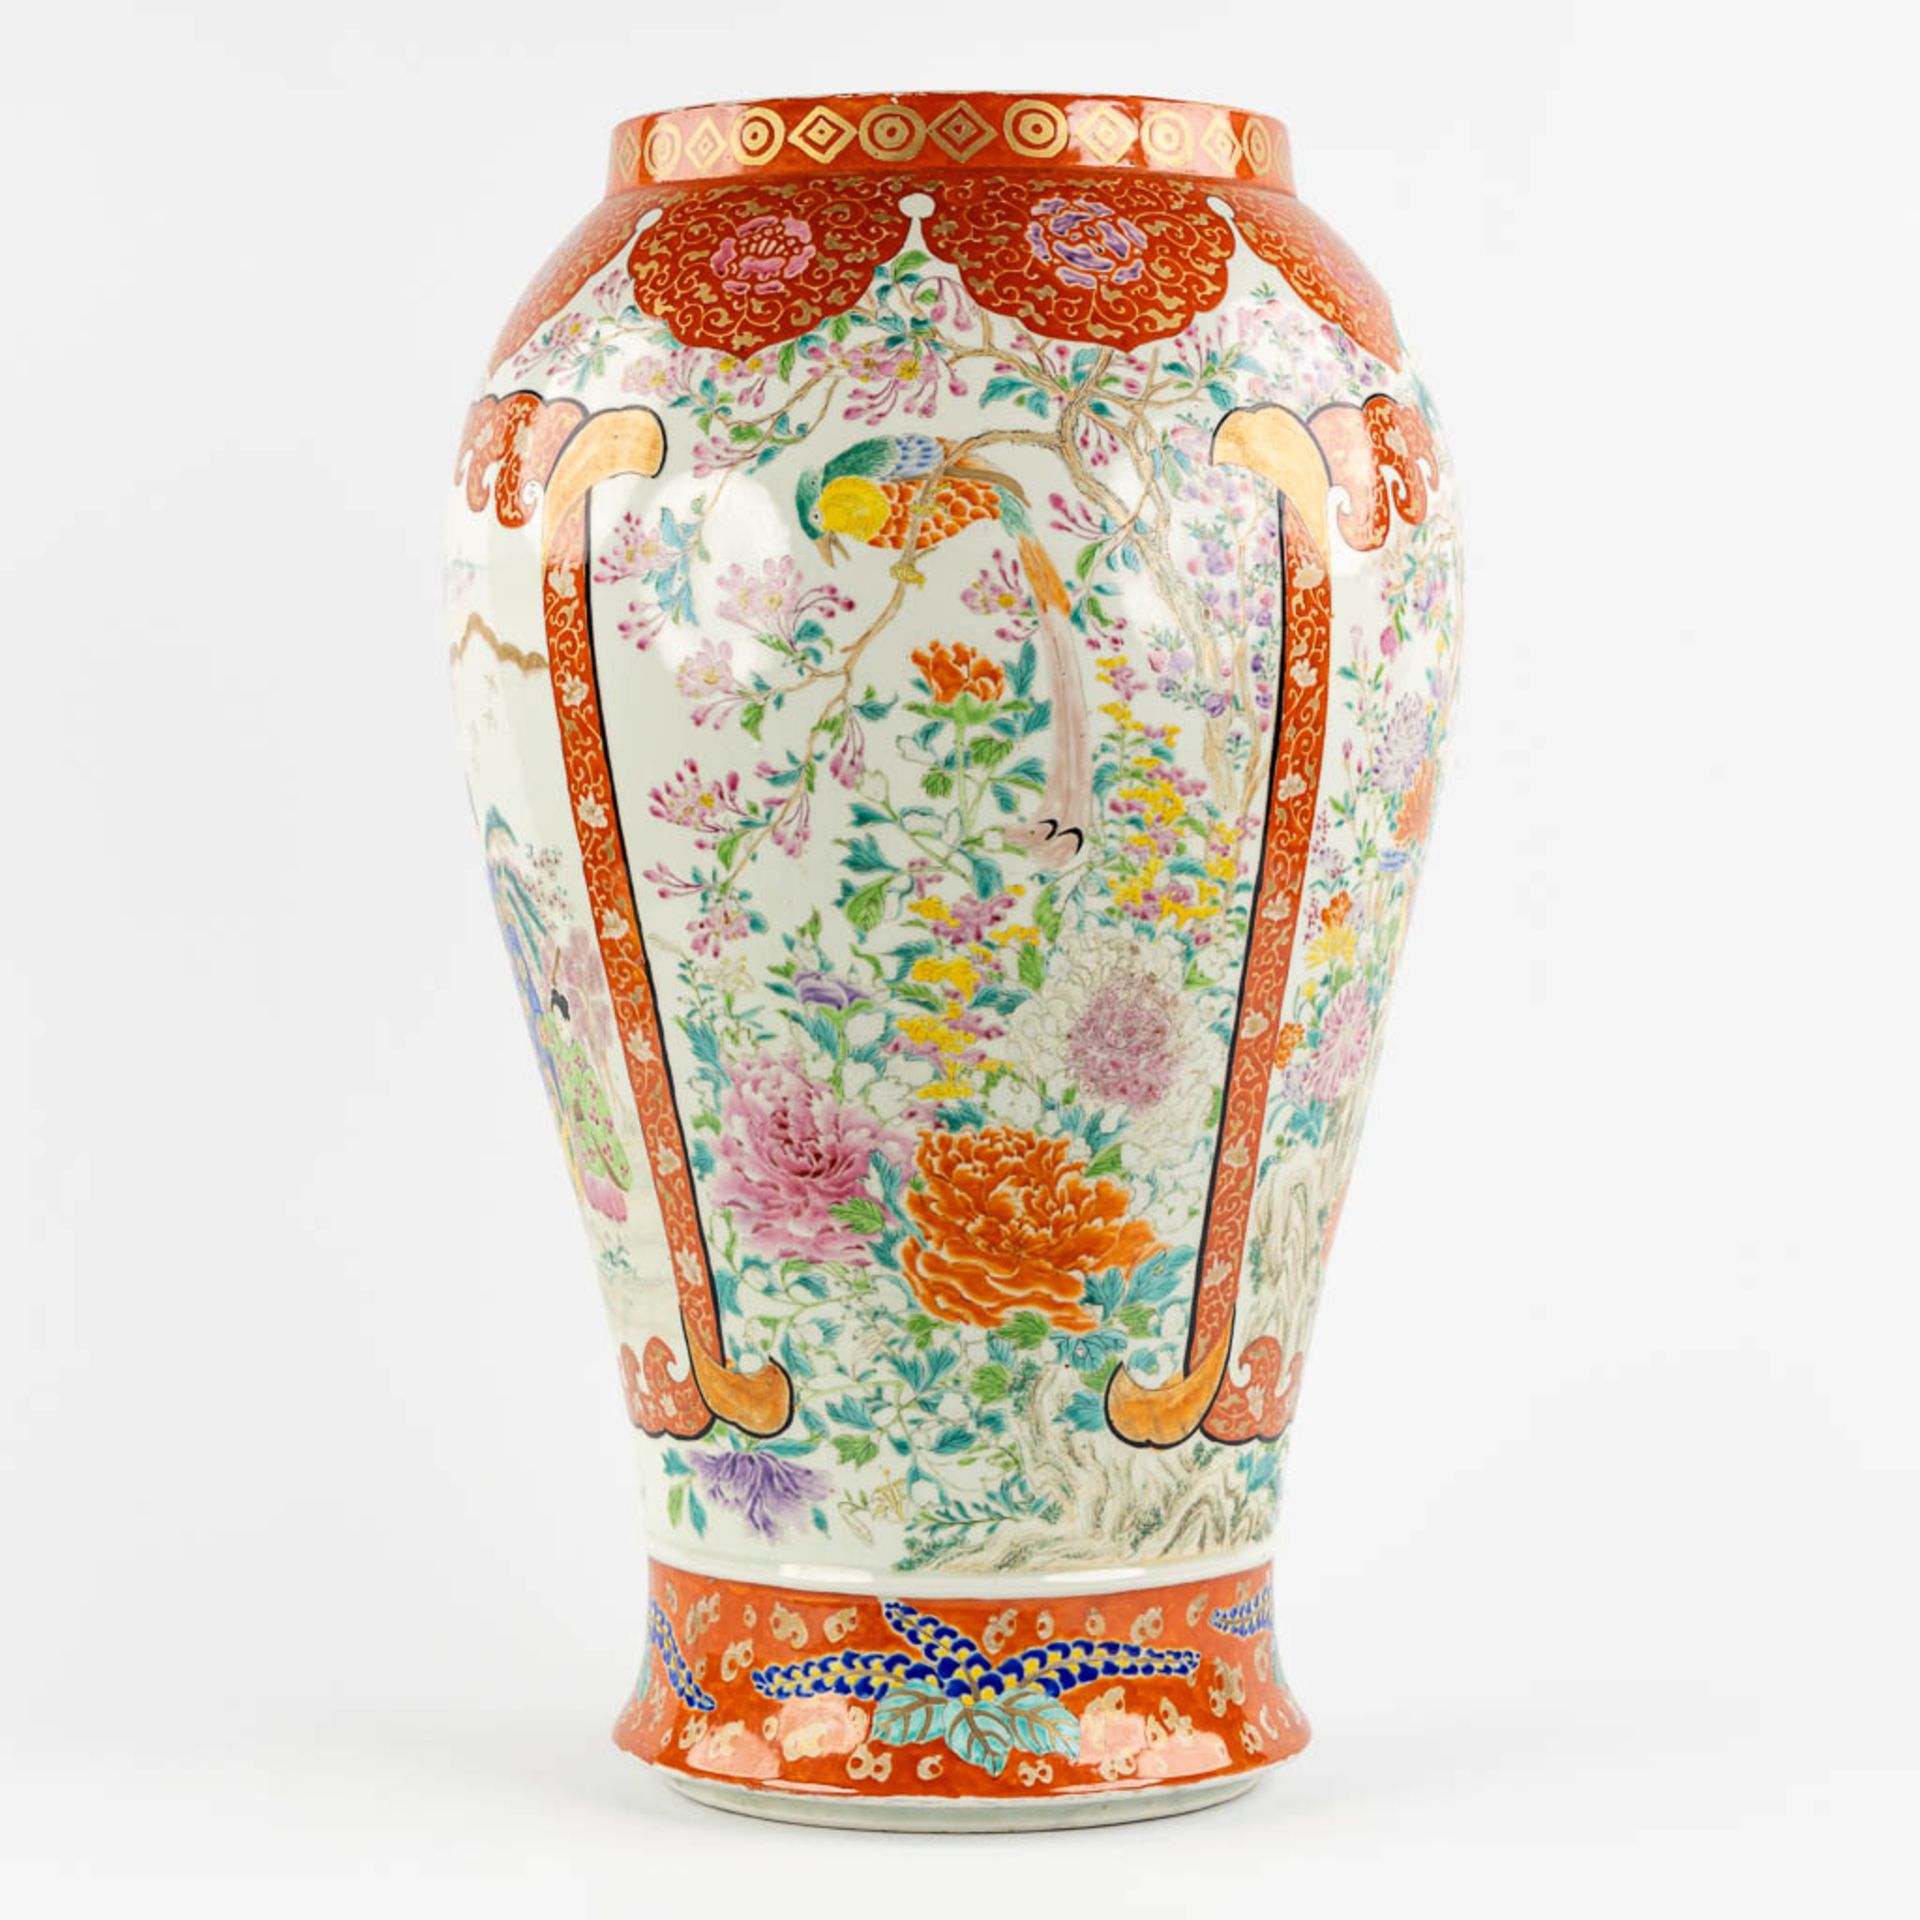 A large Japanese Kutani vase, decorated with fauna and flora. 19th C. (H:61 x D:38 cm) - Image 3 of 13